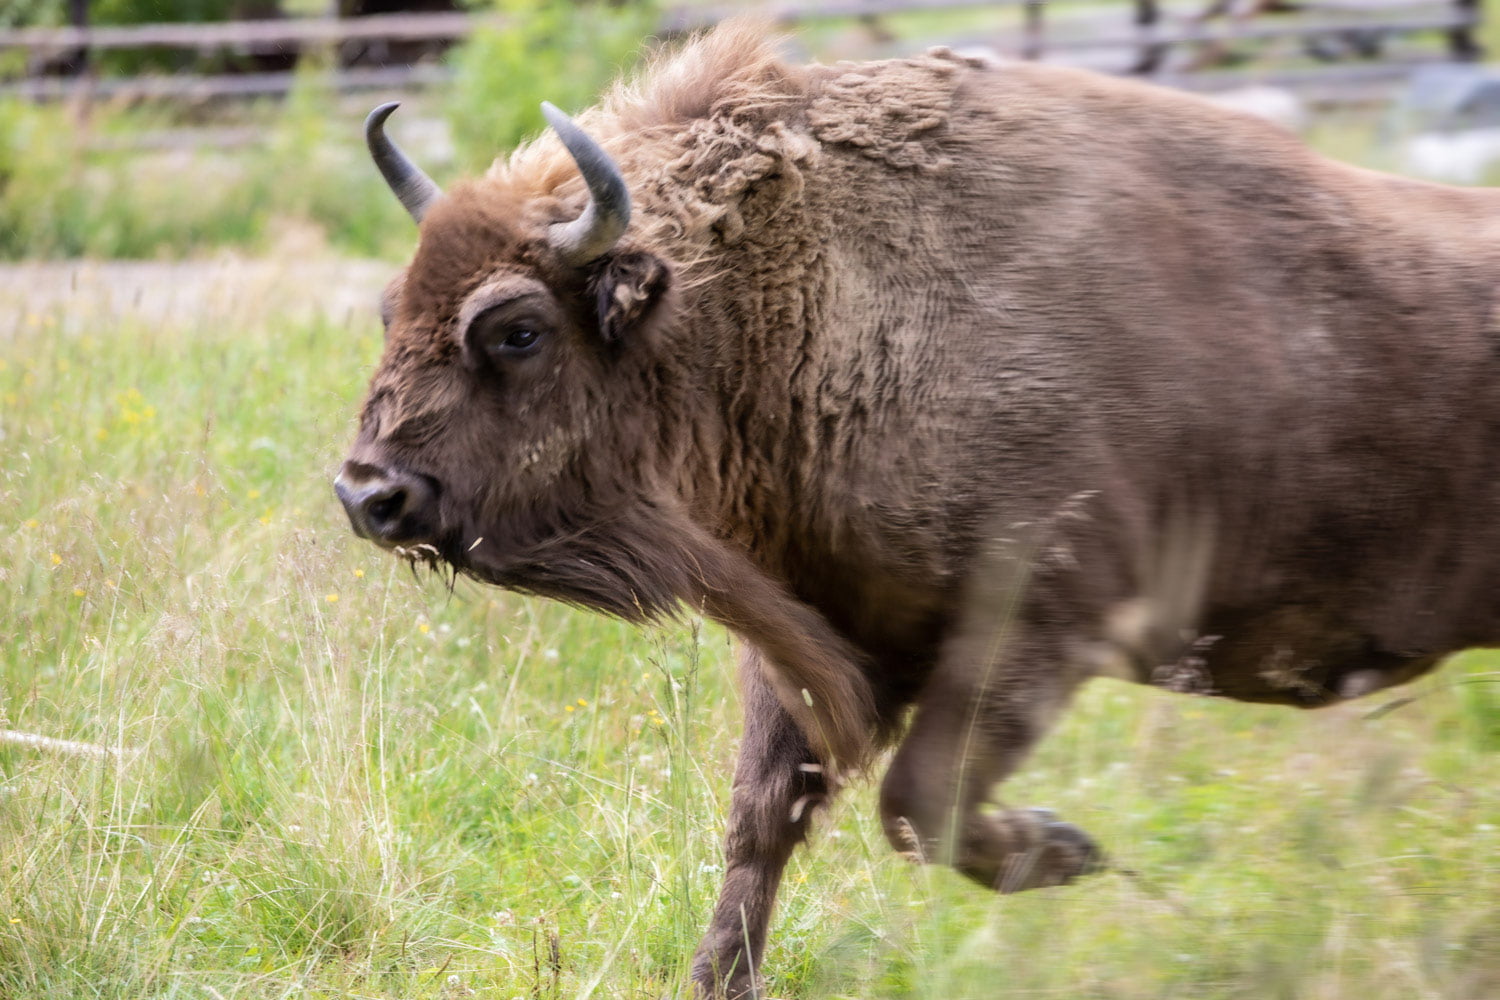 The European bison is a fast runner